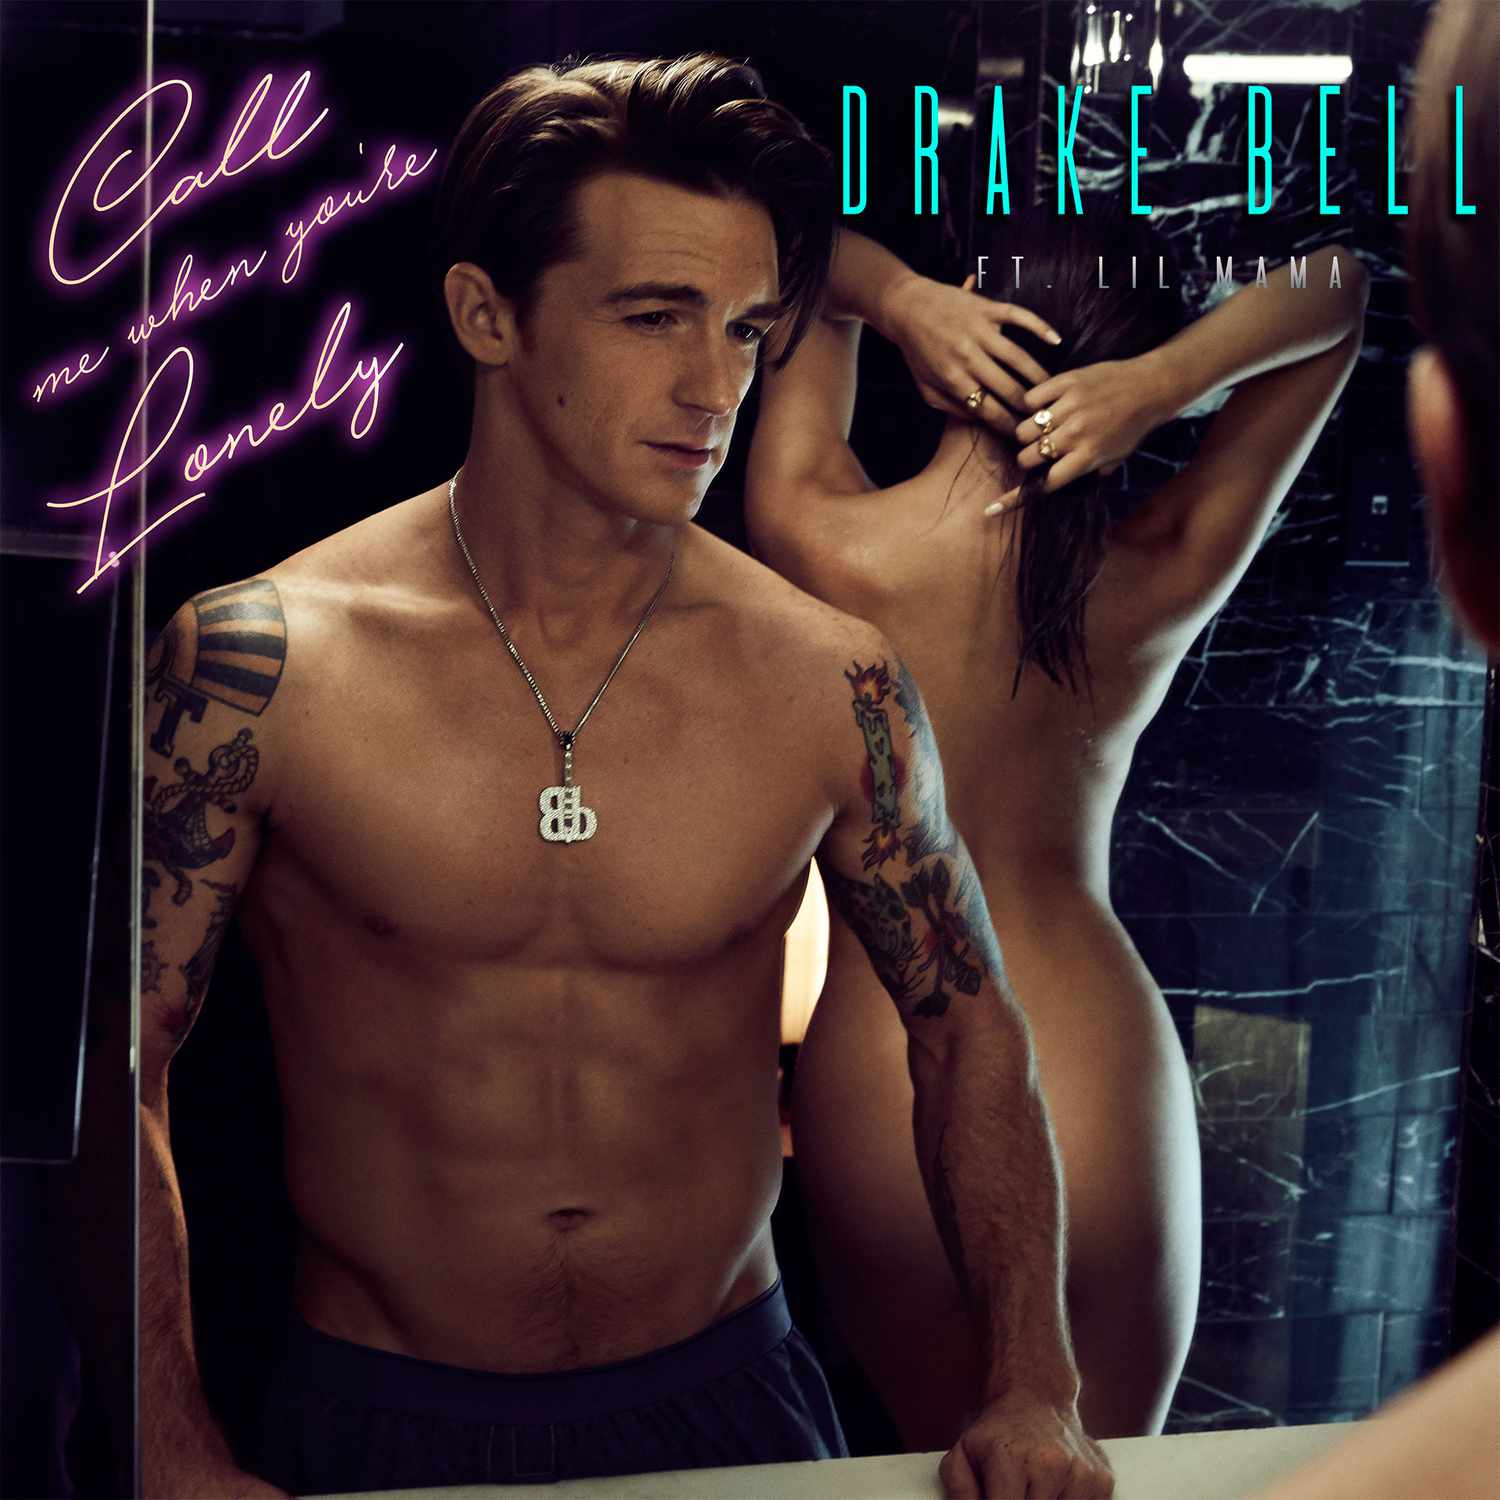 cathy vanderlinden recommends drake bell leaked nude pic